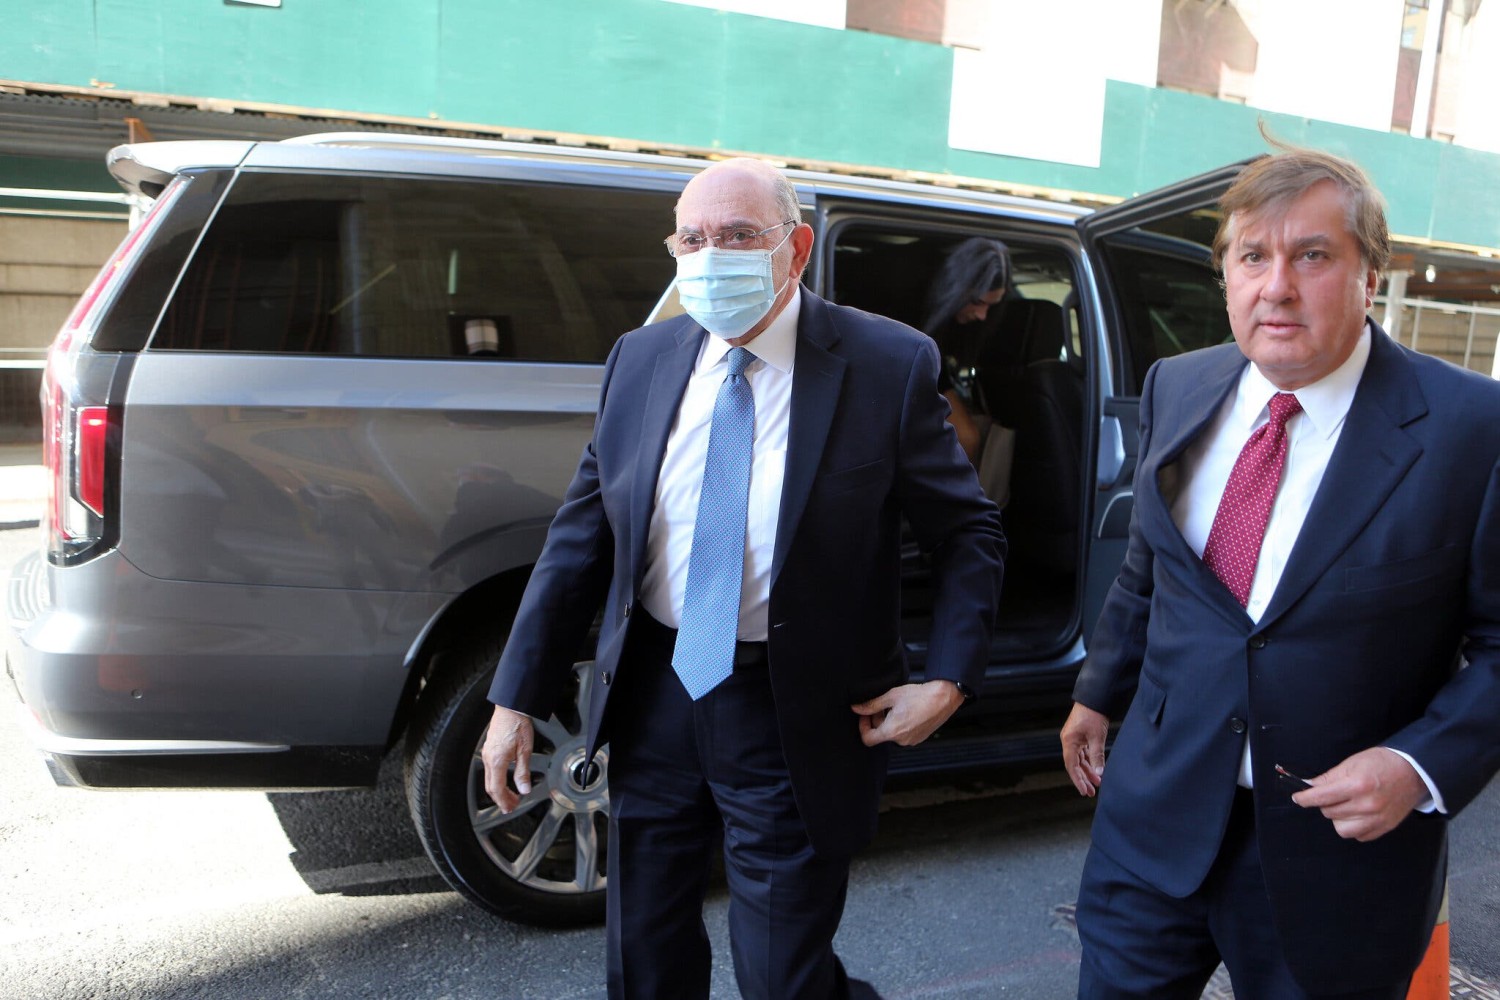 Allen Weisselberg, left, appeared in a Manhattan courtroom on Thursday to plead guilty to 15 felonies.Credit...Jefferson Siegel for The New York Times